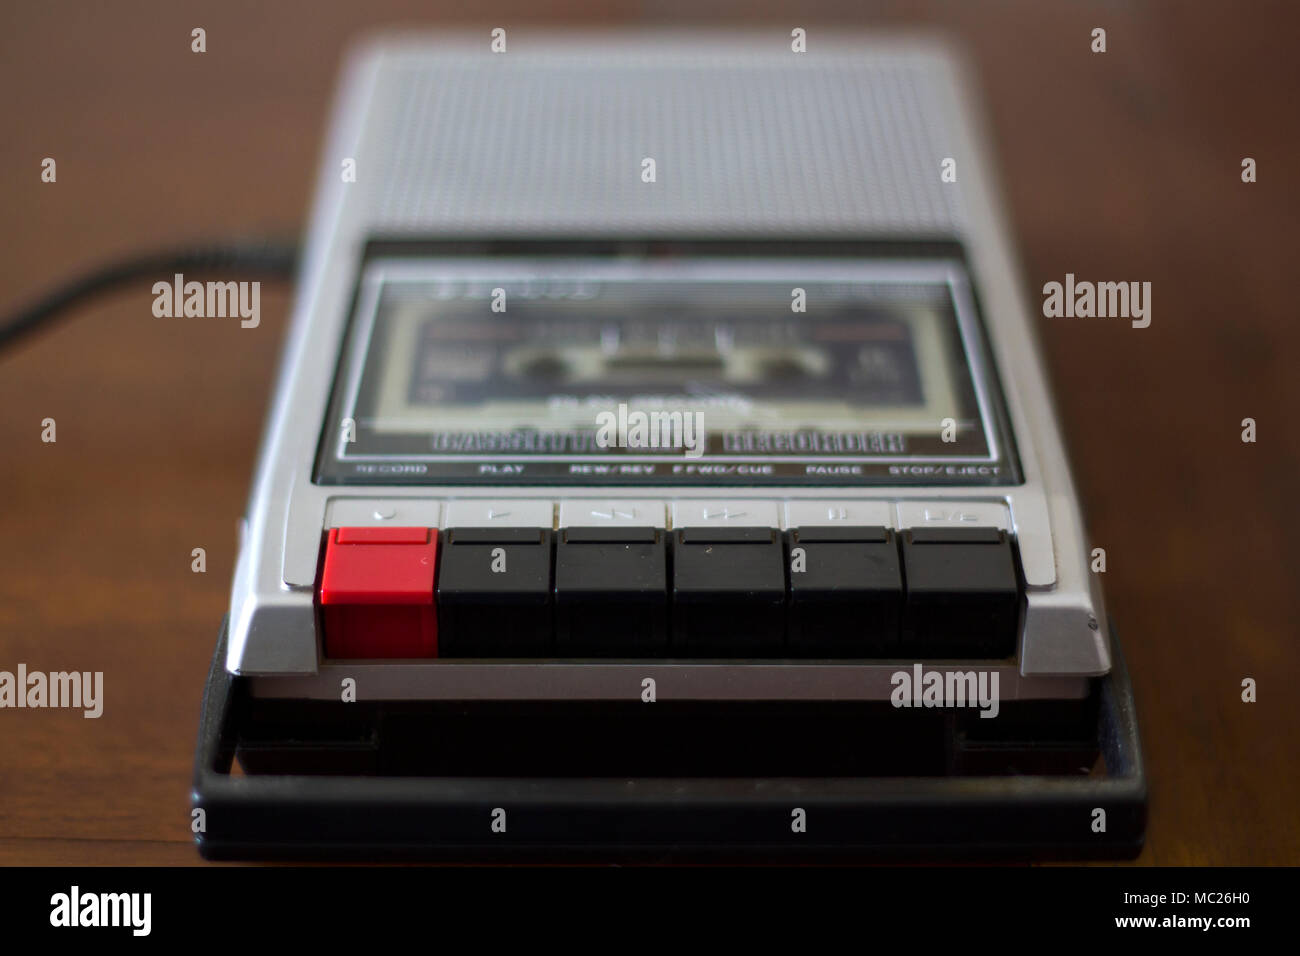 Vintage cassette tape player recorder with audio tape cassette inside Stock Photo